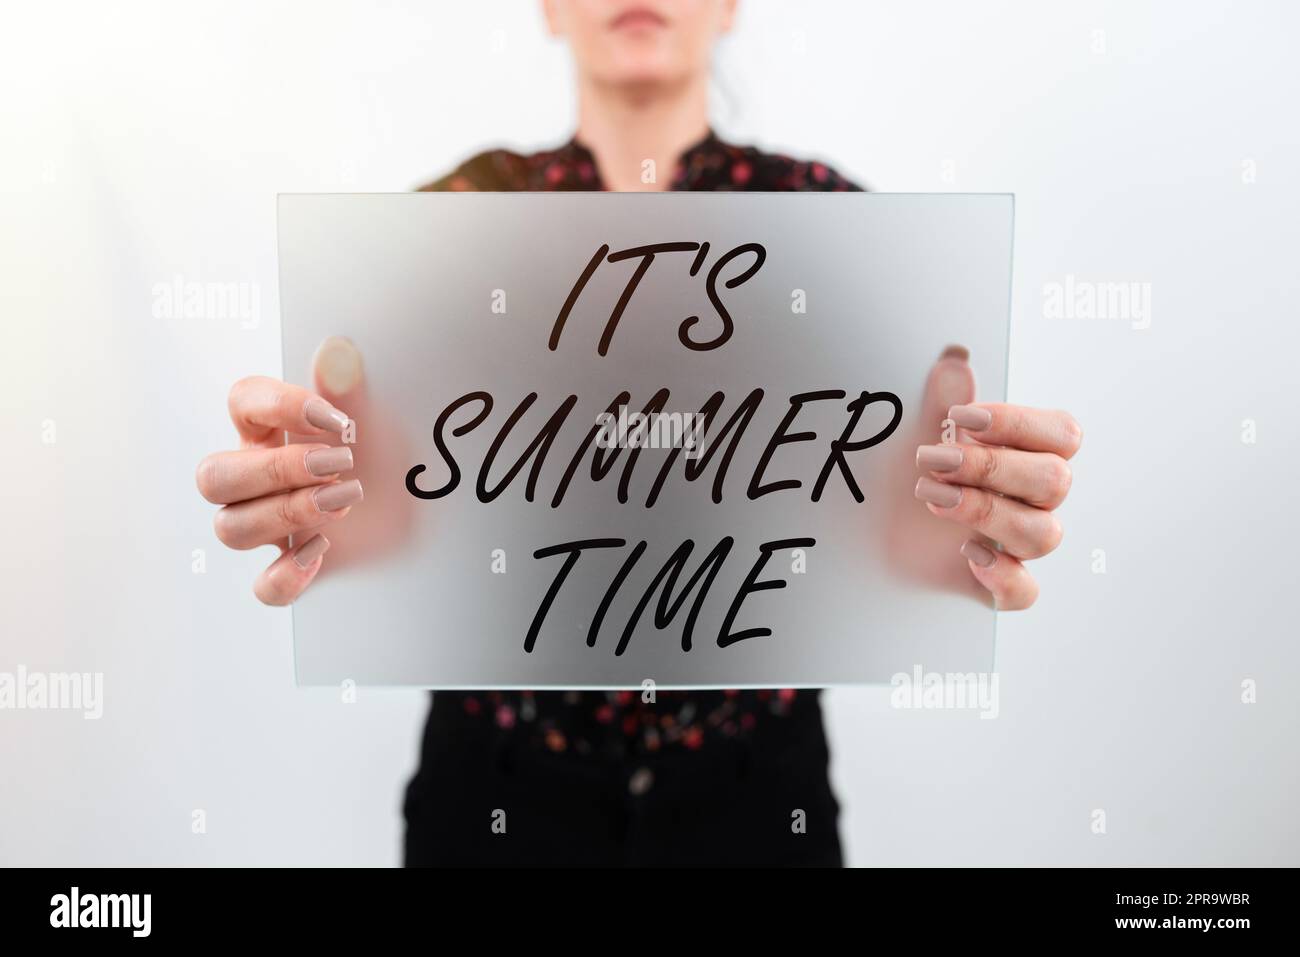 Text showing inspiration It S Summer Time. Business approach Relax sunny hot season of the year Vacation beach trip Woman Showing Placard And Presenting Important Ideas For Marketing. Stock Photo